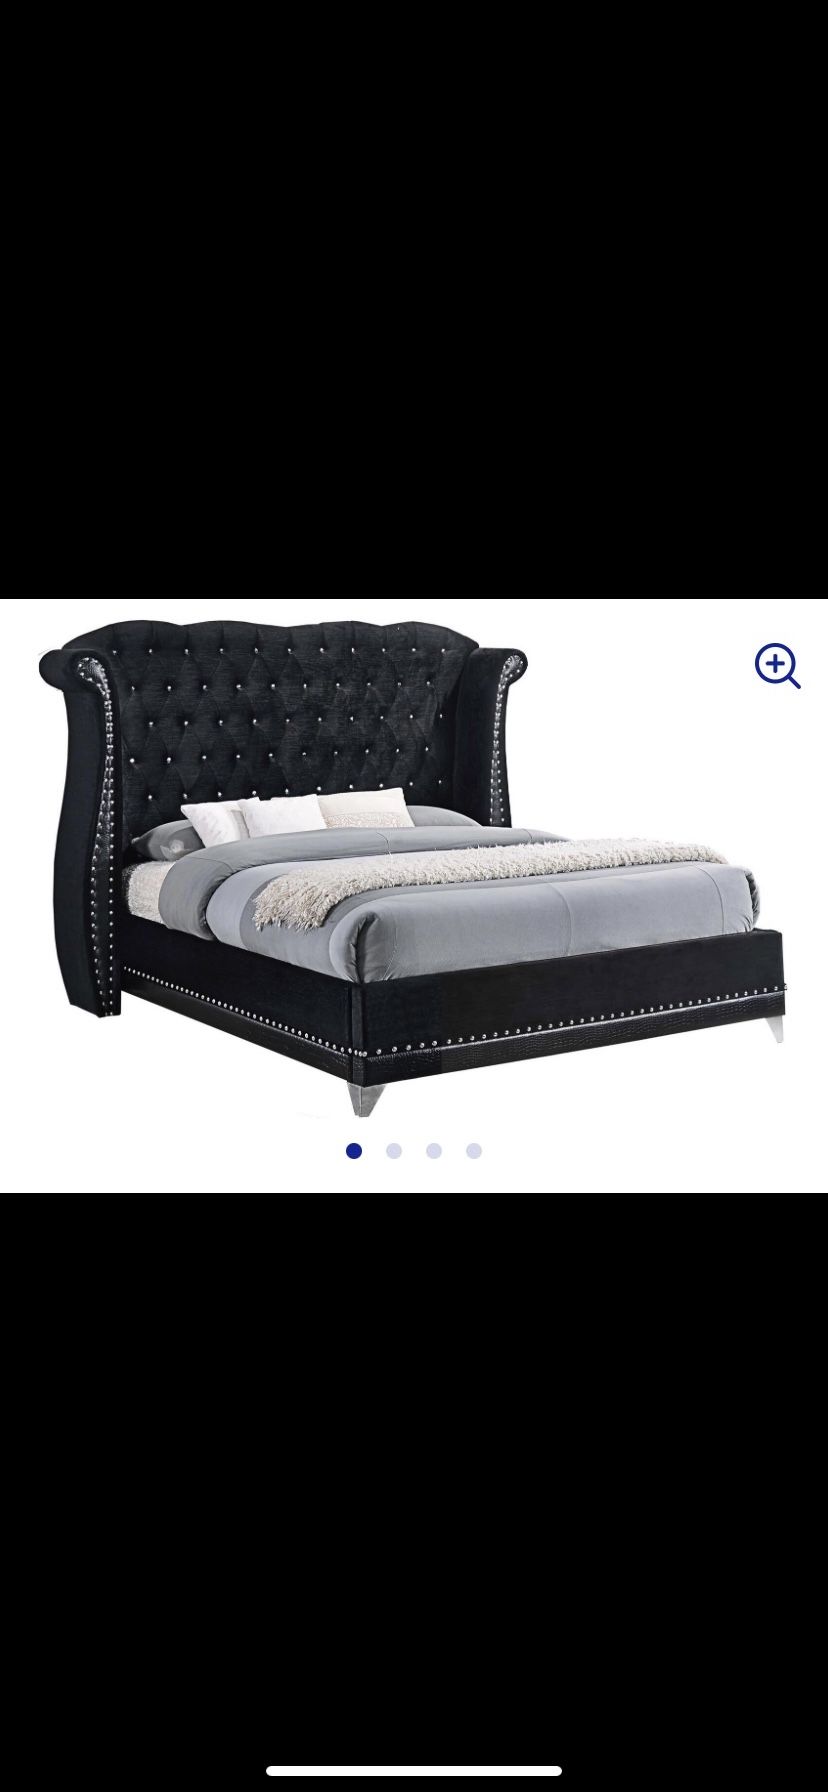 Queen Size Bed For Sale